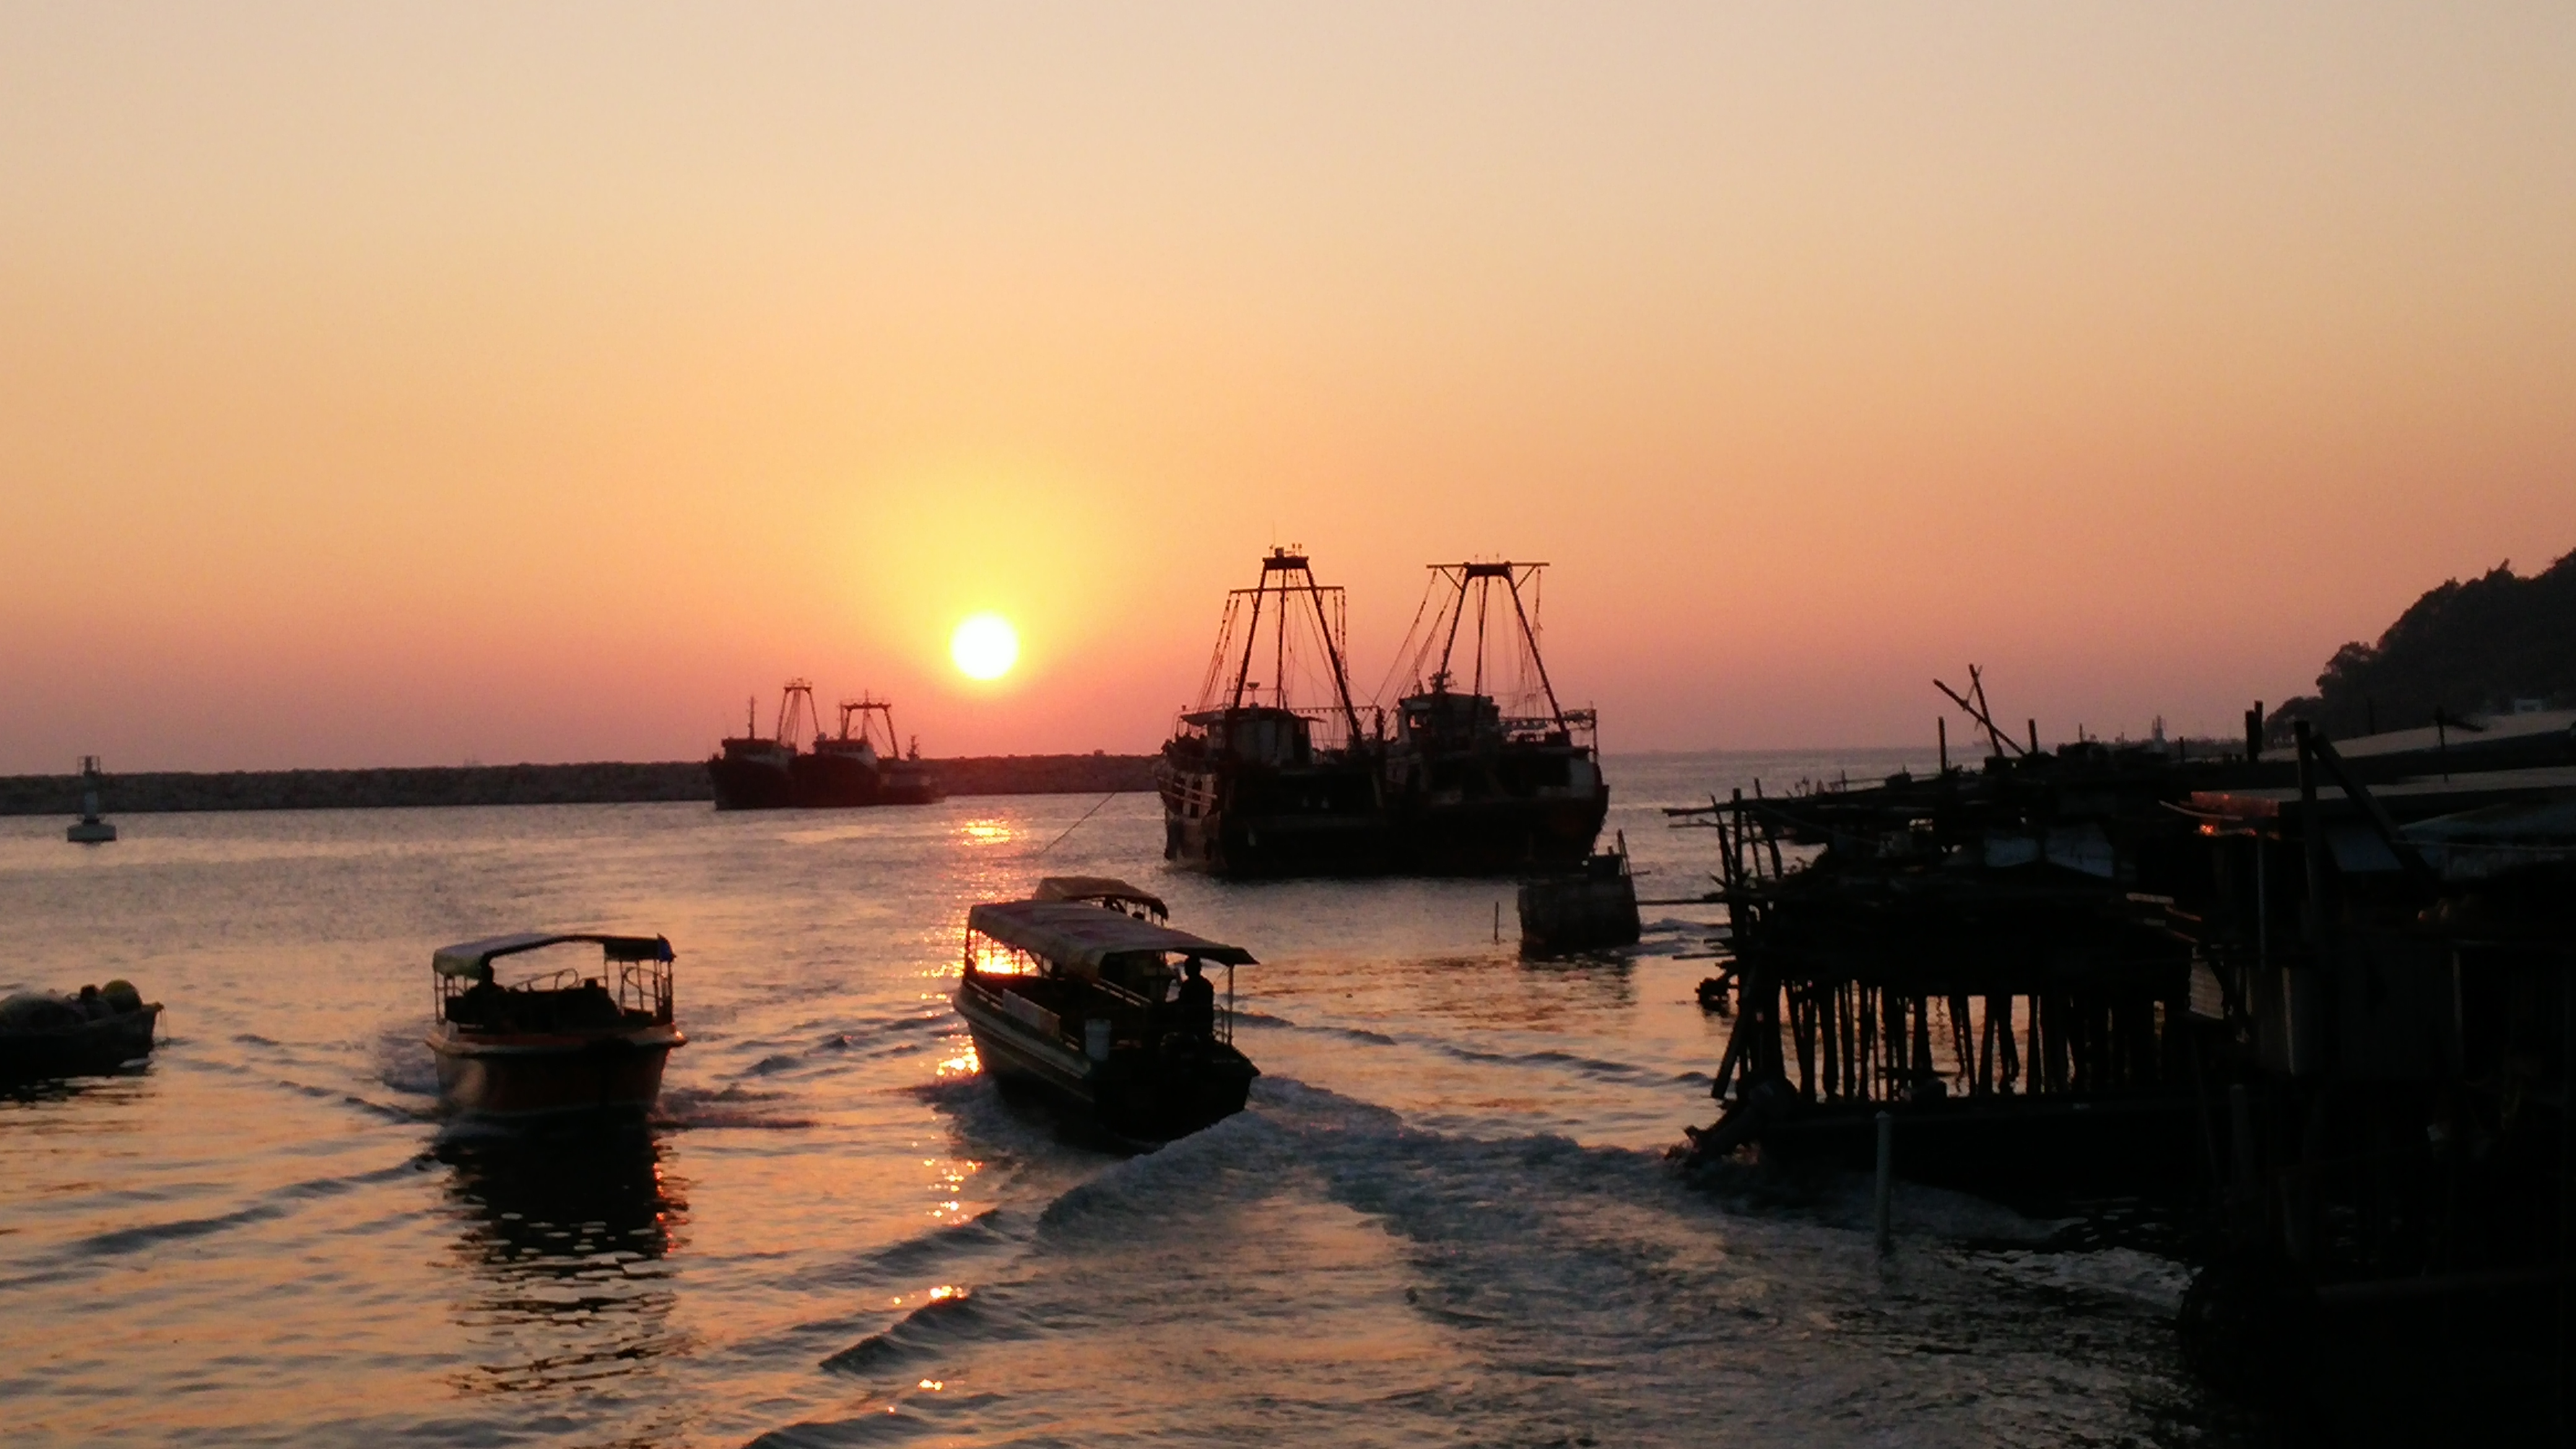 See sunset and stilt houses at Tai O fishing village